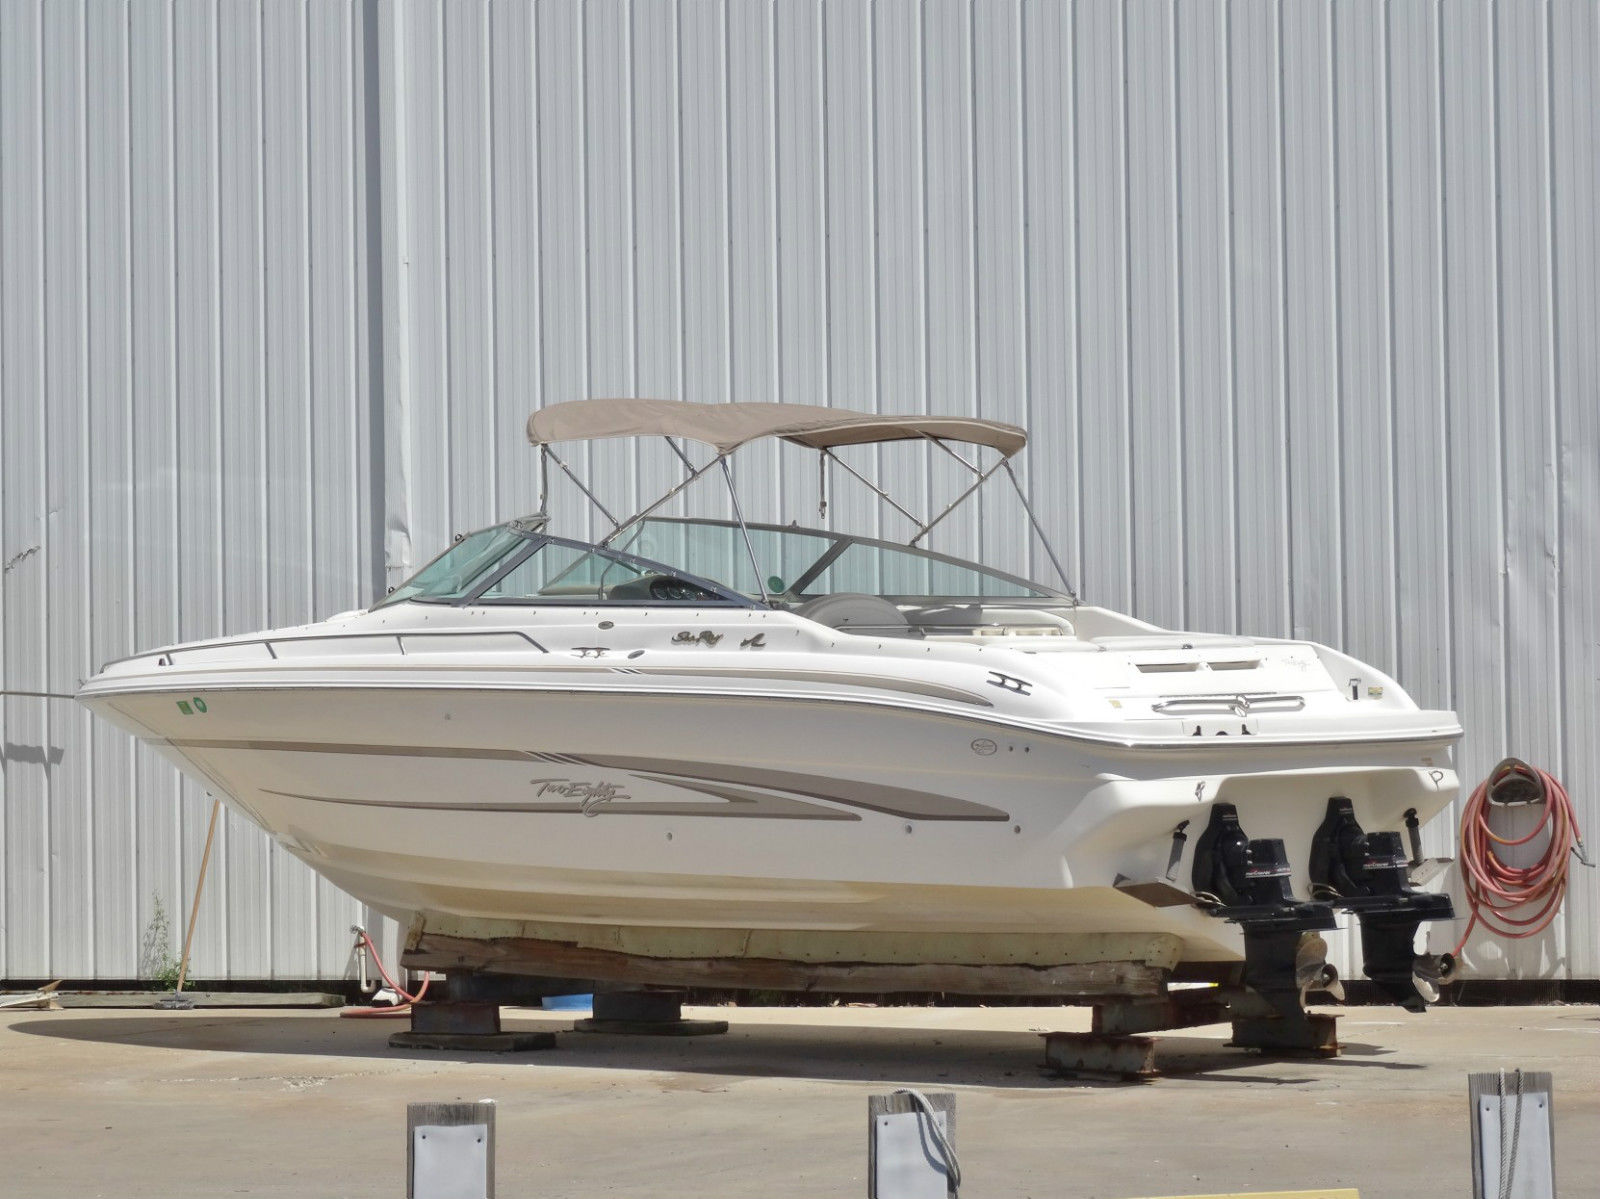 Sea Ray 280 BR 1998 for sale for $21,000.